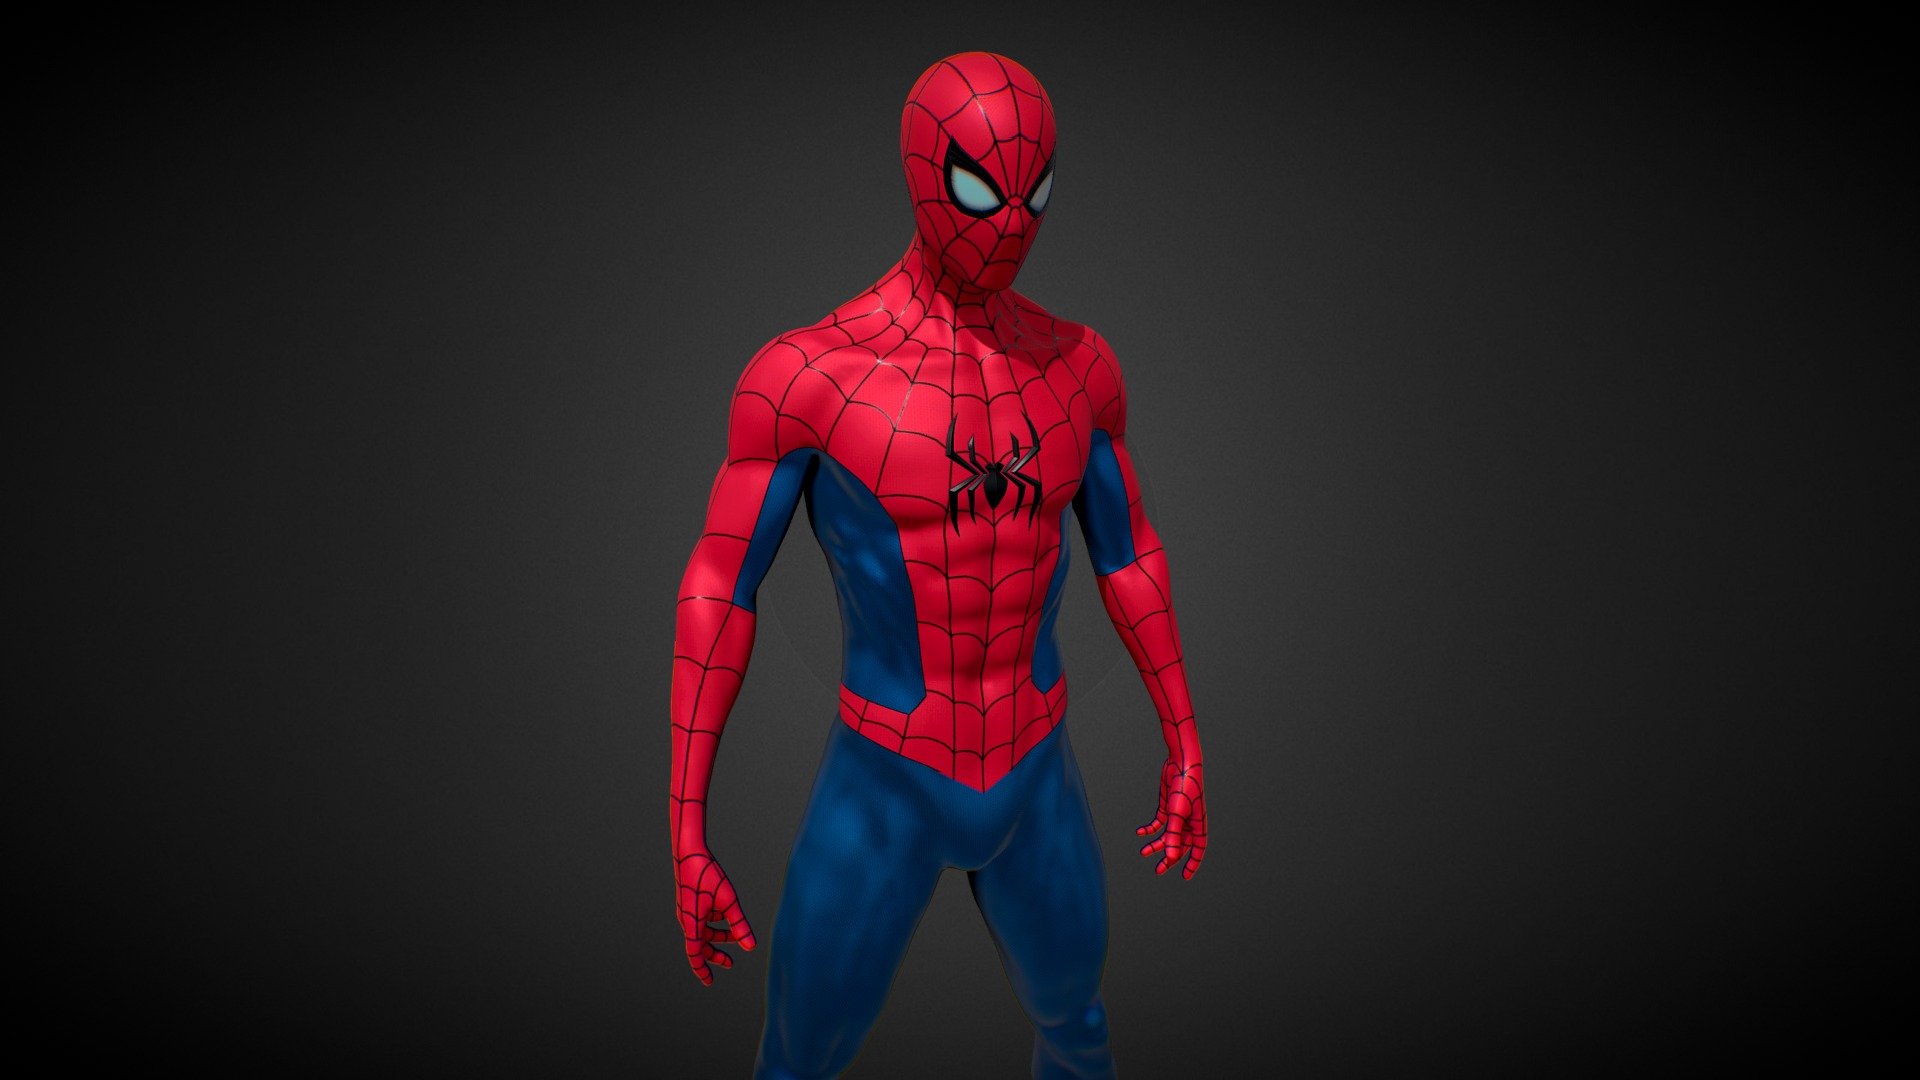 Spiderman comic books character published by Marvel Comics. 




Model was made on Maya, Zbrush, substance painter  and Blender . 

This model is inspired by Tom holland spiderman no way home ending scene suit

The model has a Spiderman no way home ending scene suit

High quality texture work.

The model comes with complete 4k textures and Blender, FBX And OBJ file formats 

The model has 6 materials 1 material is a glass material without any map and other 5 materials contains 5 maps Basecolor, Roughness, Metalness, Normal and Ao

All textures and materials are included and mapped. (4k resoulutions)

No special plugin needed to open scene

The model can be rigg easily
 - Spider-Man No Way Home Ending Scene Suit - Buy Royalty Free 3D model by AFSHAN ALI (@Aliflex) 3d model